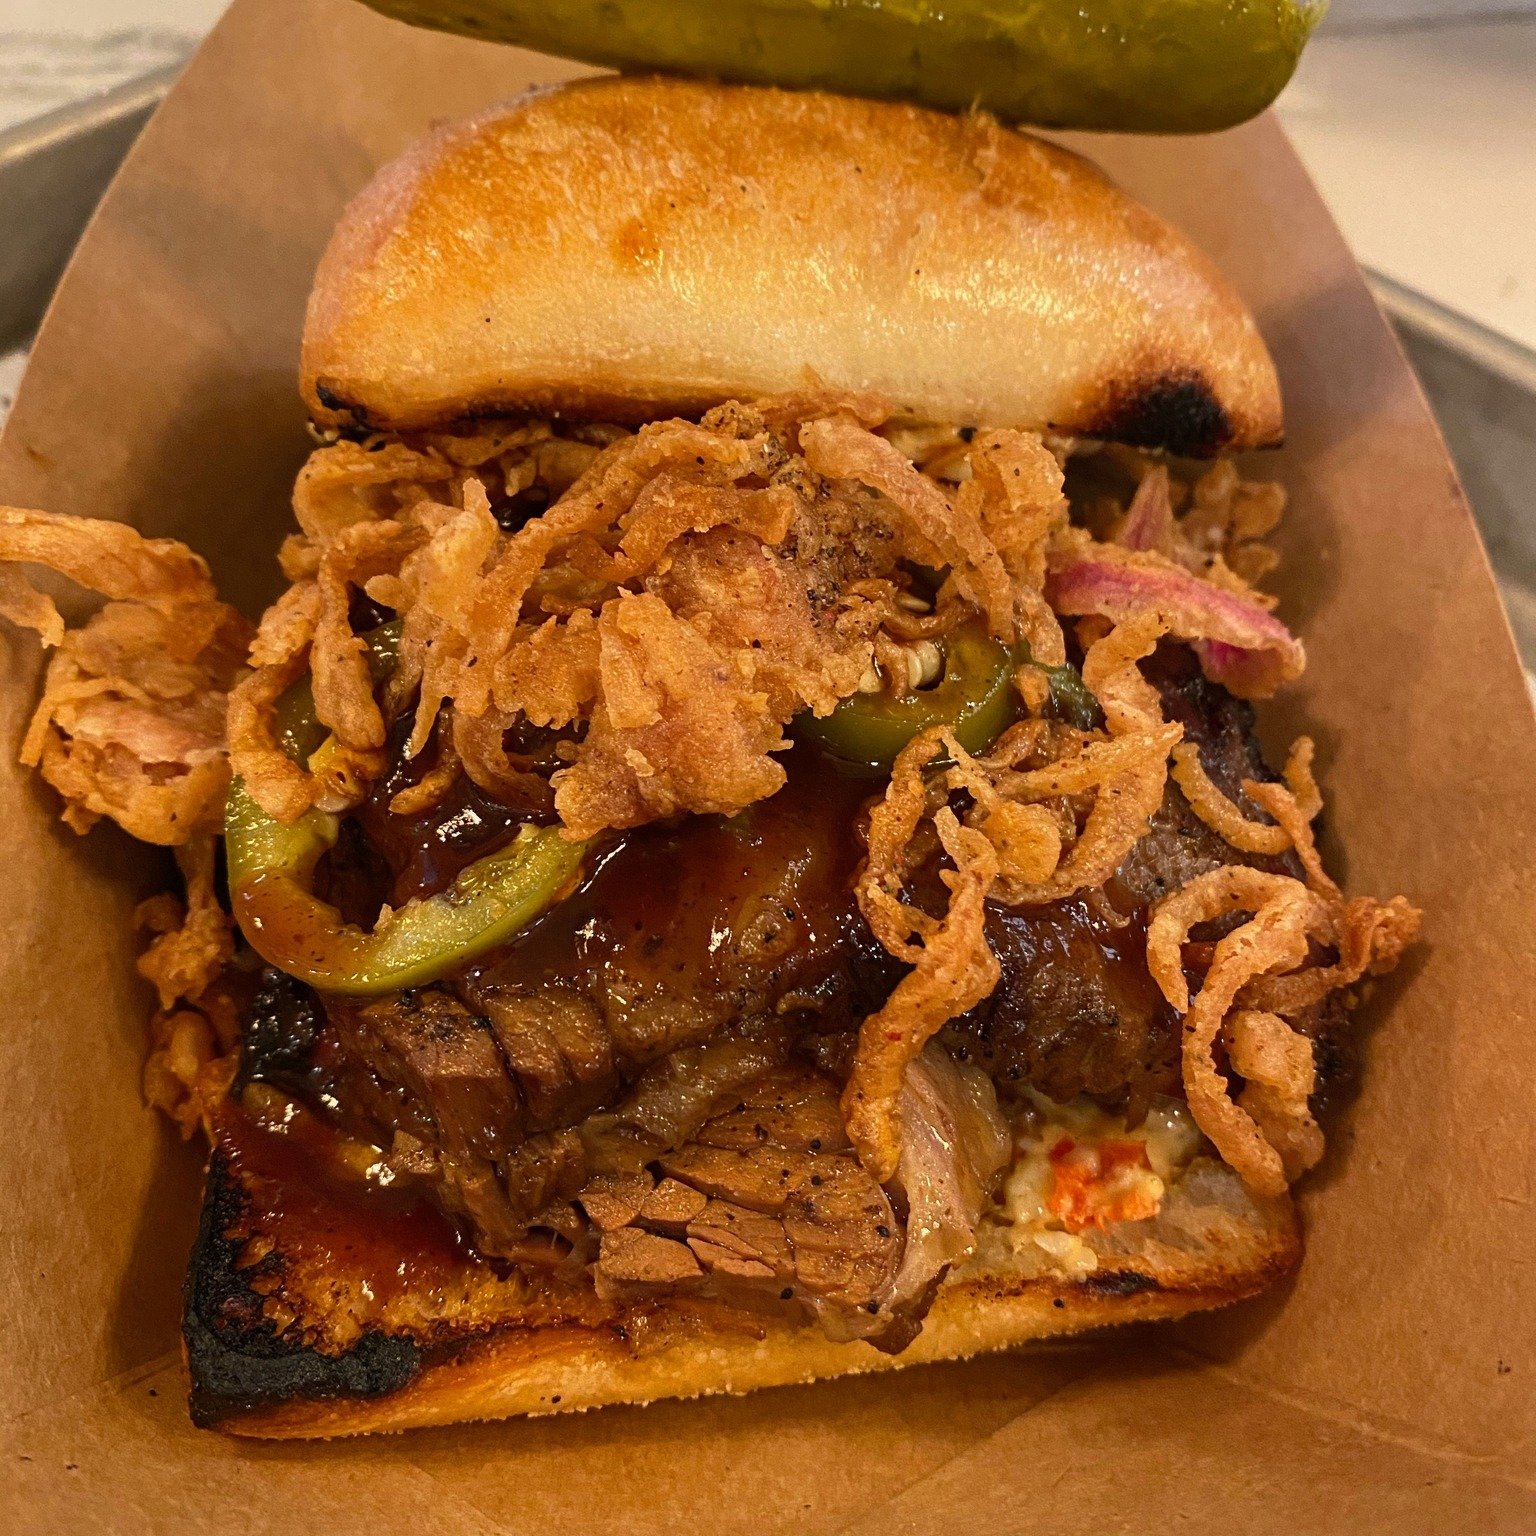 🍗🤠🍴😋 Bring out the bibs, tear open the wet wipes, and pick your favorite sauce, because it&rsquo;s time to talk about the best BBQ at Walt Disney World. With goodies like ribs, pulled pork, chicken, sausage, and sides like mac and cheese, beans, 